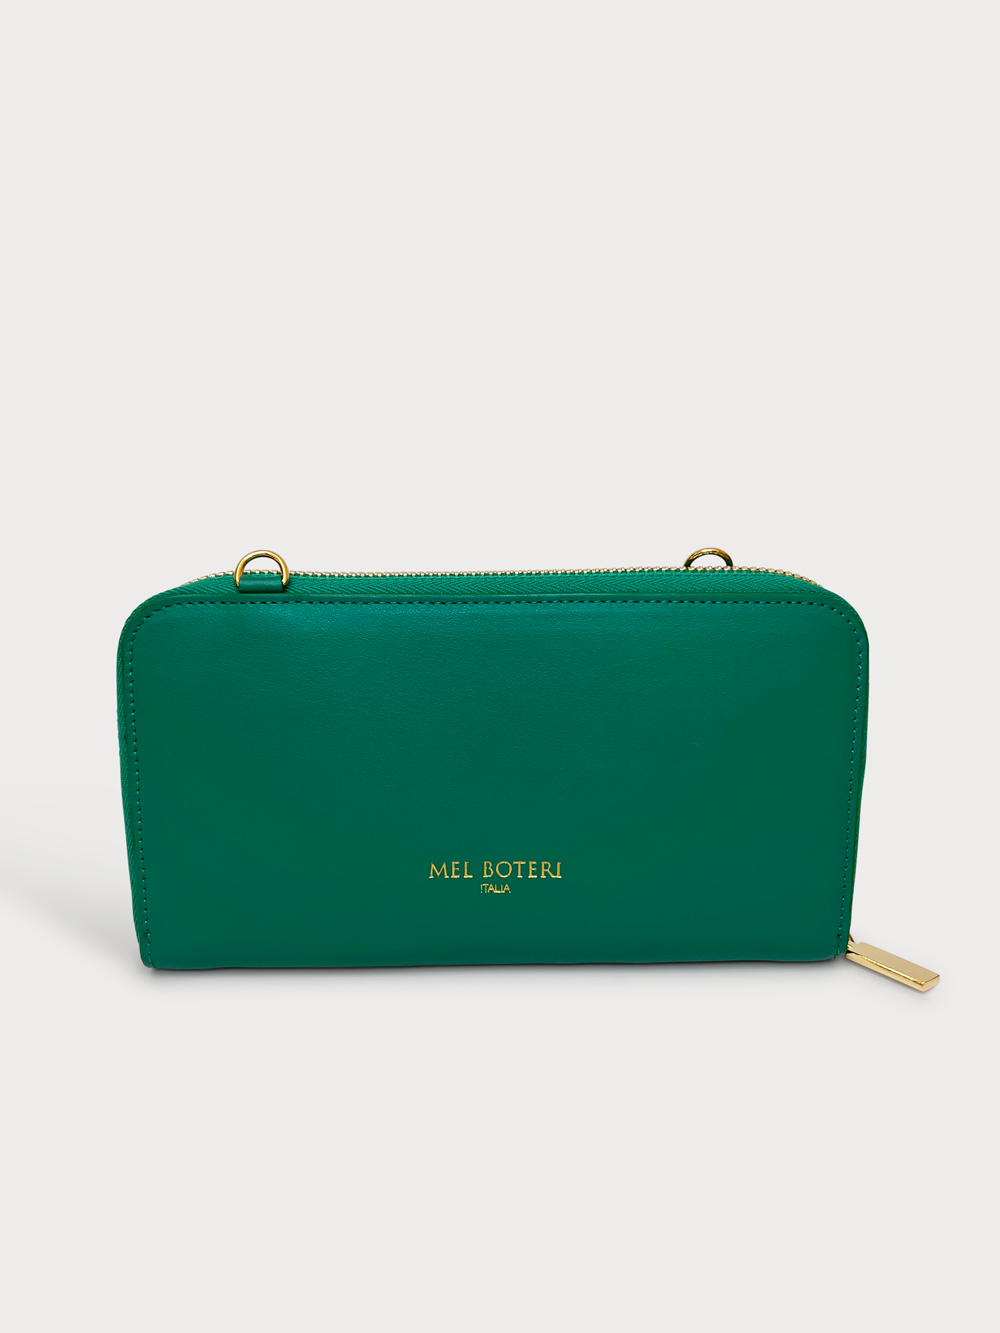 Mel Boteri | 'Himani' Wallet Clutch Bag With Detachable Cross-Body Strap | emerald leather | Made in Italia